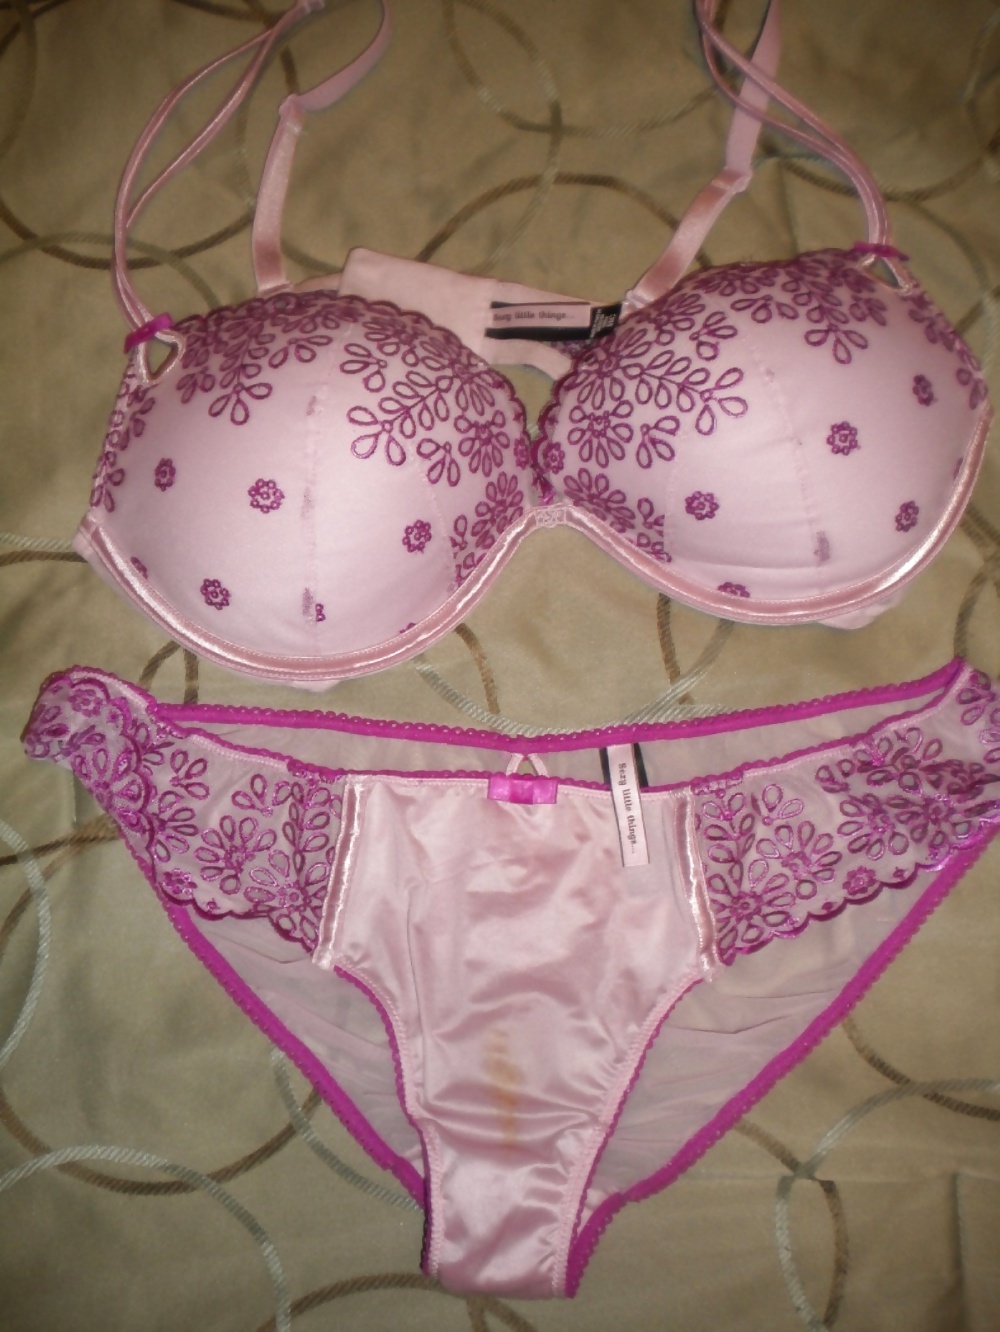 My mother in law dirty panties and bra from last sunday #26497628